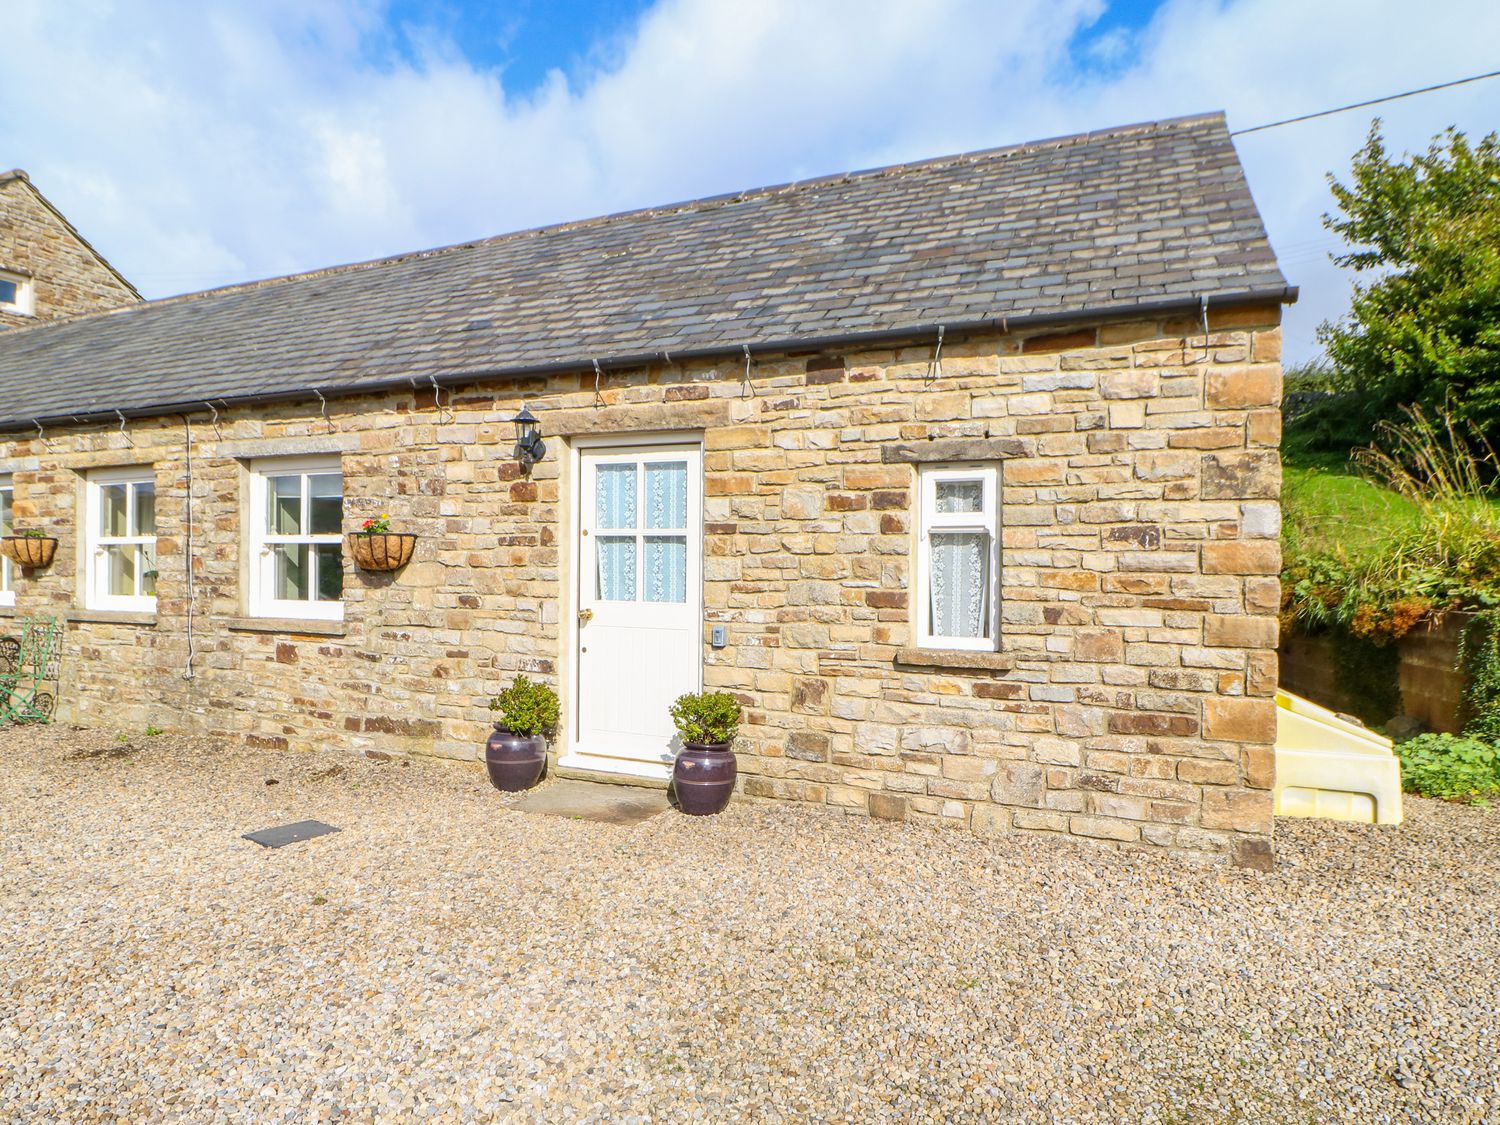 The Byre at High Watch - Northumberland - 17537 - photo 1